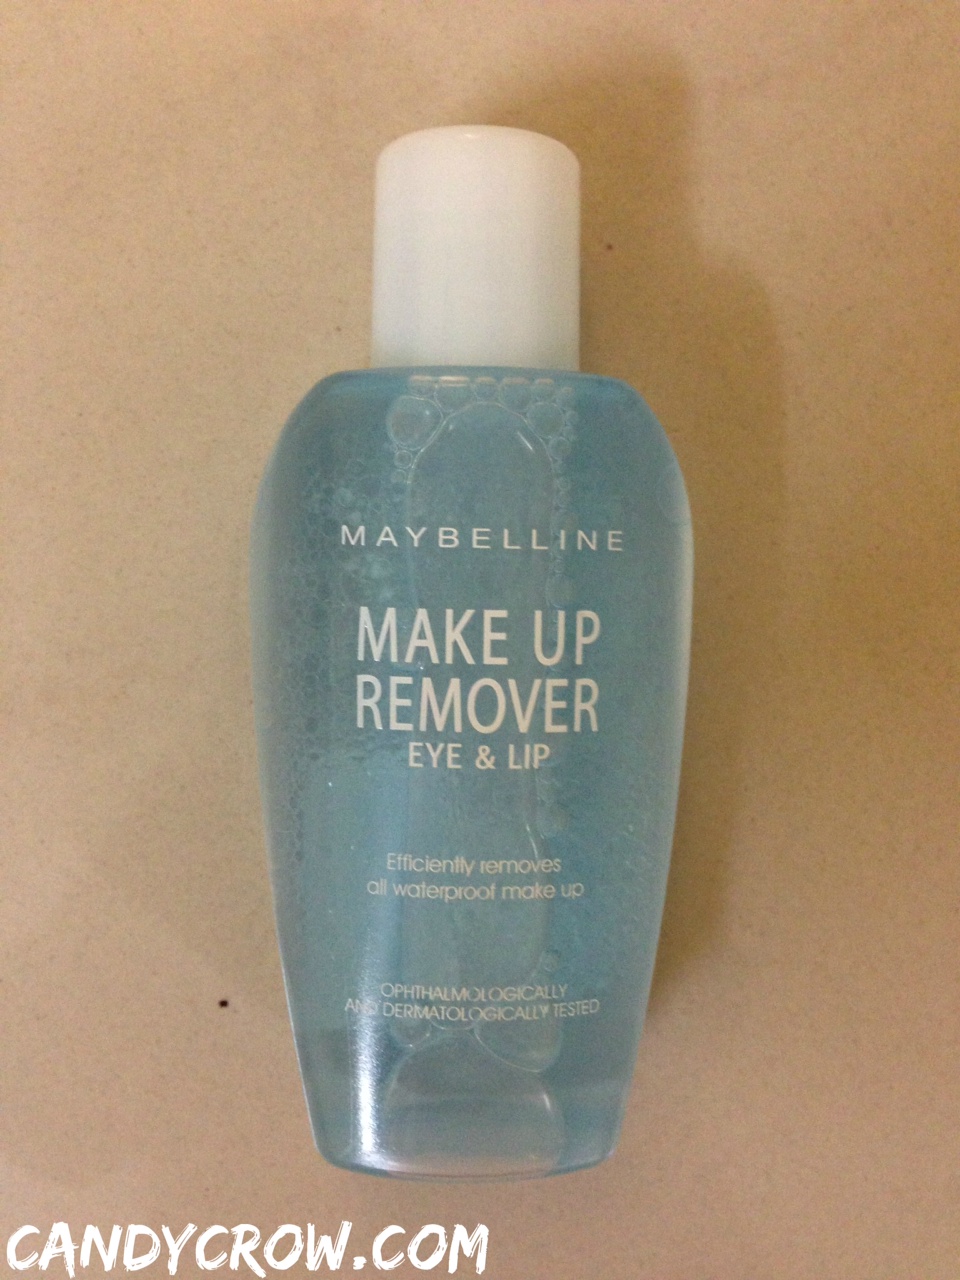 Maybelline makeup remover Review